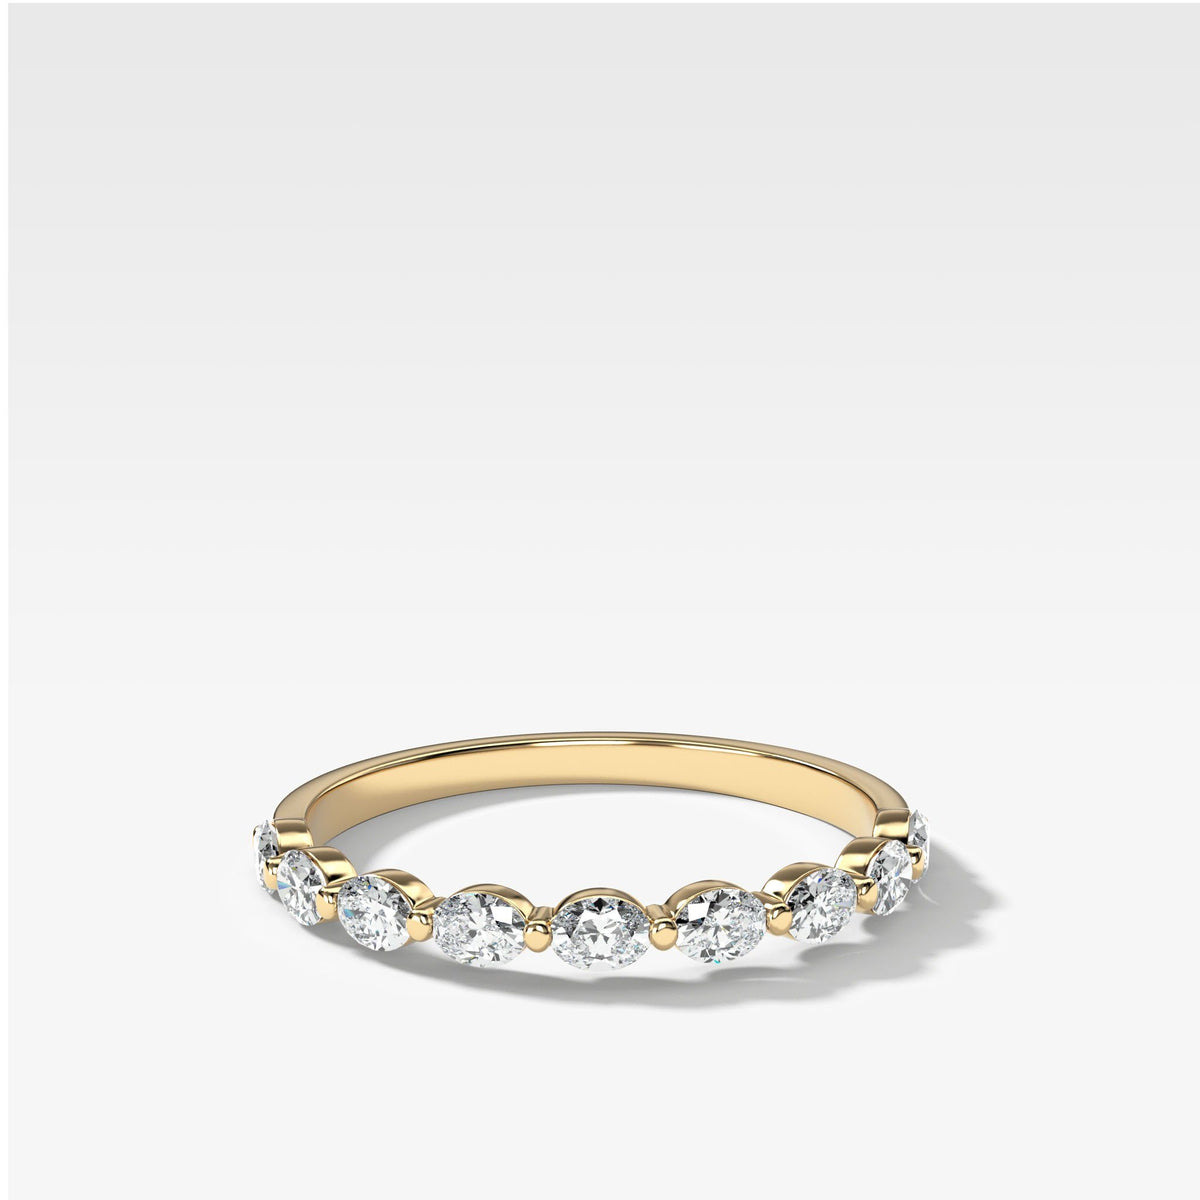 Oval Interstellar Wedding Band by Good Stone in Yellow Gold